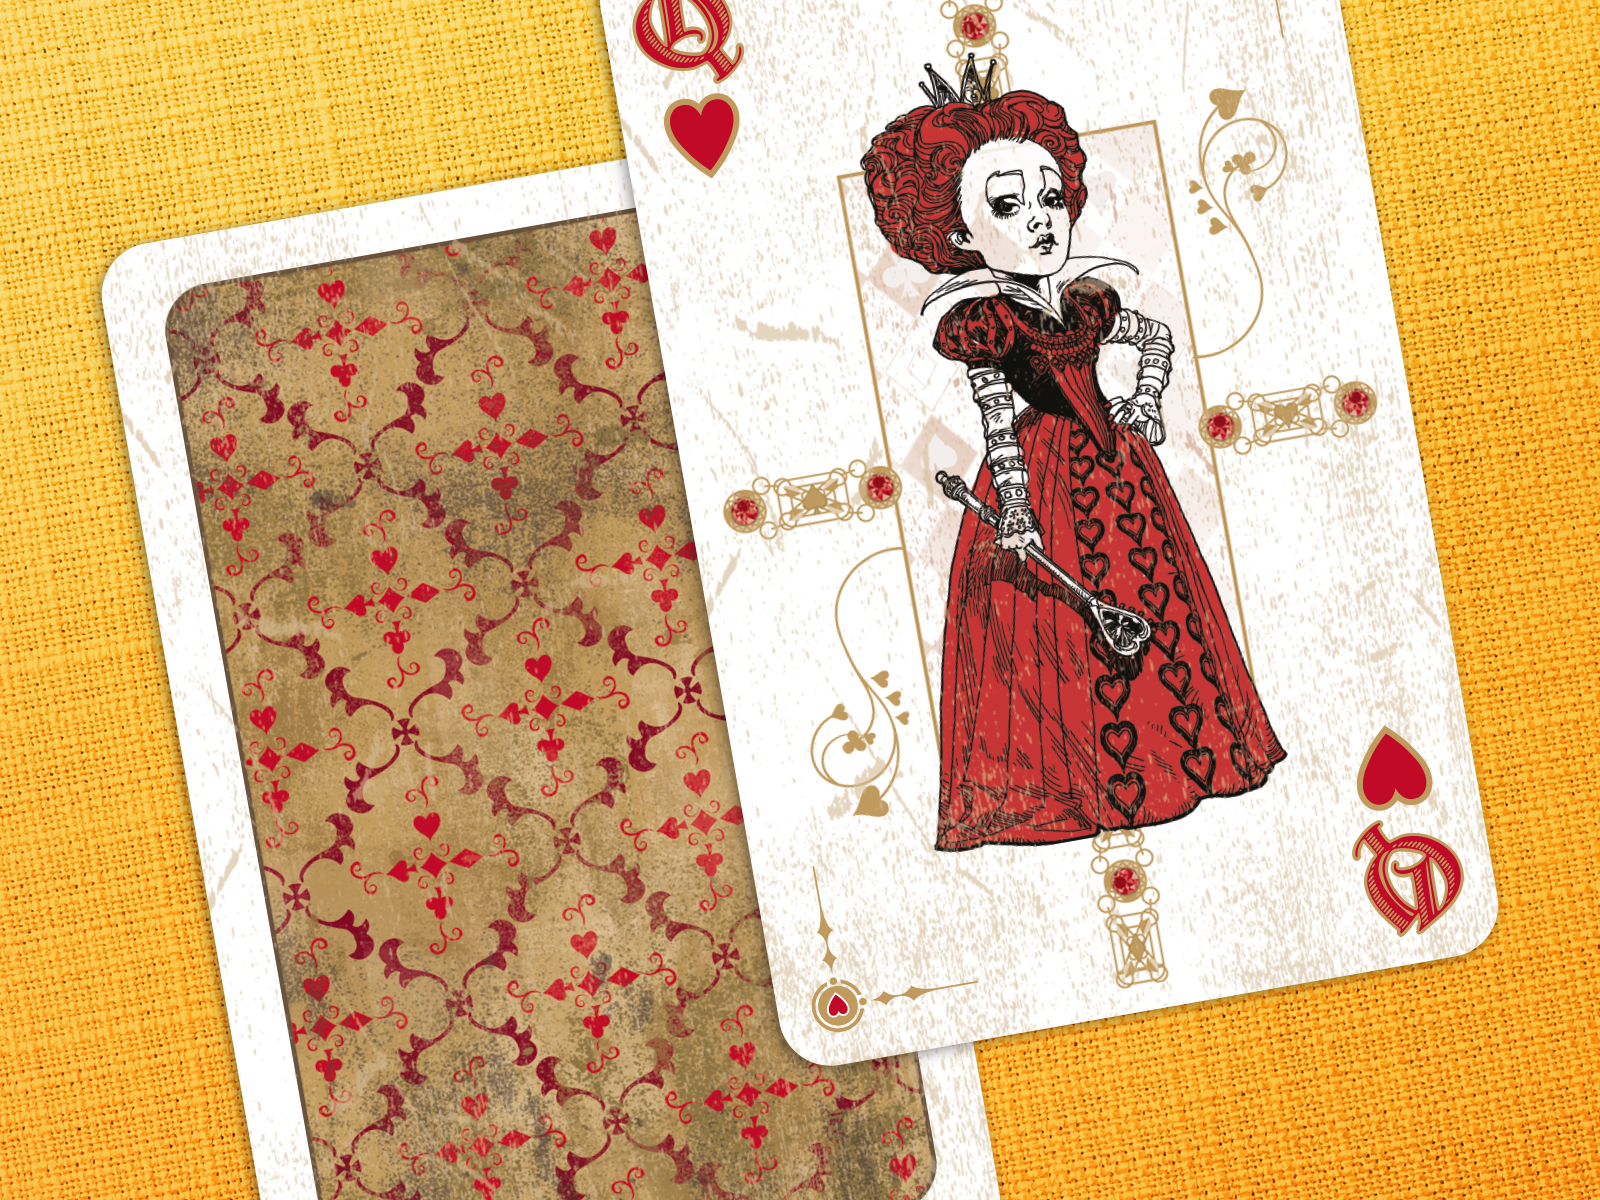 alice-in-wonderland-playing-cards-by-fabio-michelan-on-dribbble